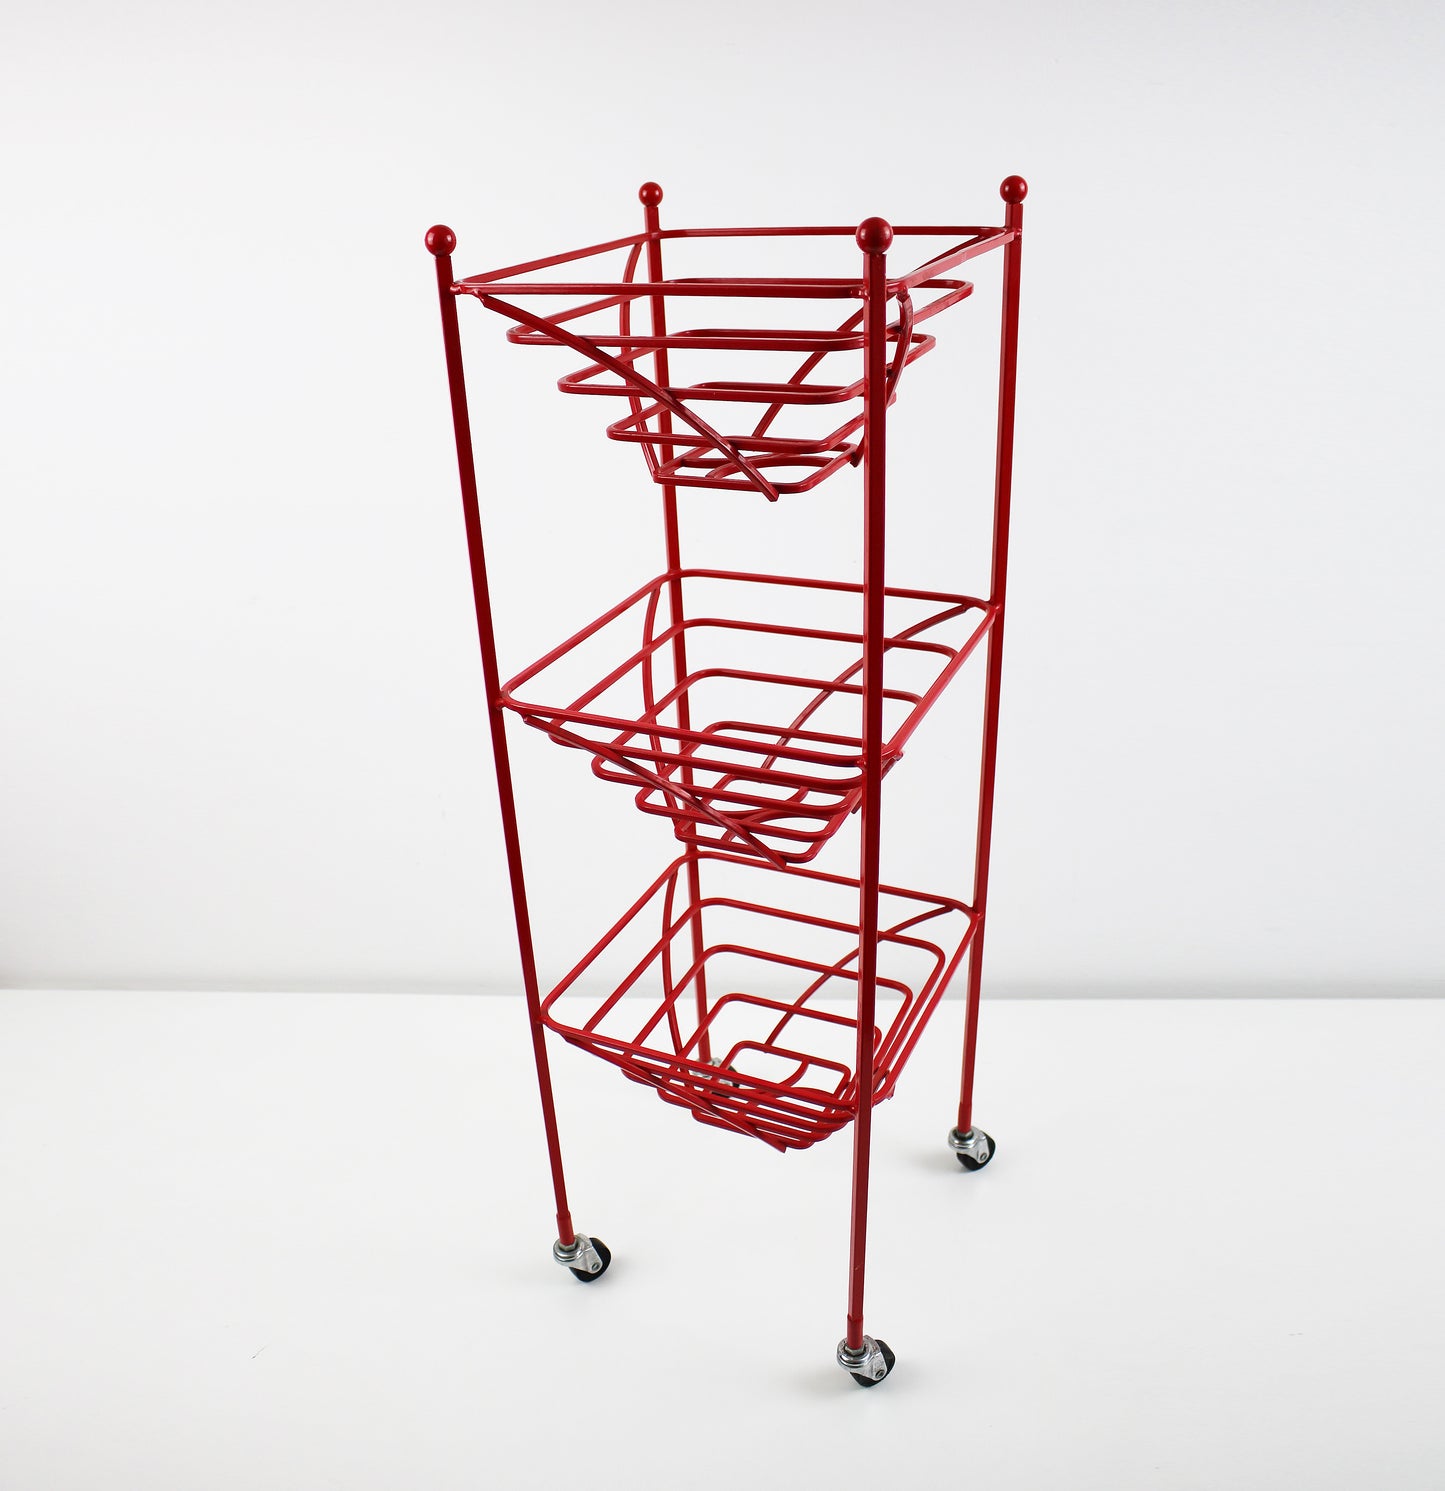 Preloved 3 tier fruit basket vegetable trolley - atomic revival red coated steel - late 20th centuryRed powder coated square tubular steel trolley with 3 fruit or vegetable baskets. Bobble detail at the top reminiscent of the atomic revival. Research suggests that this is either late 80s or 1990s Habitat but as yet unverified.